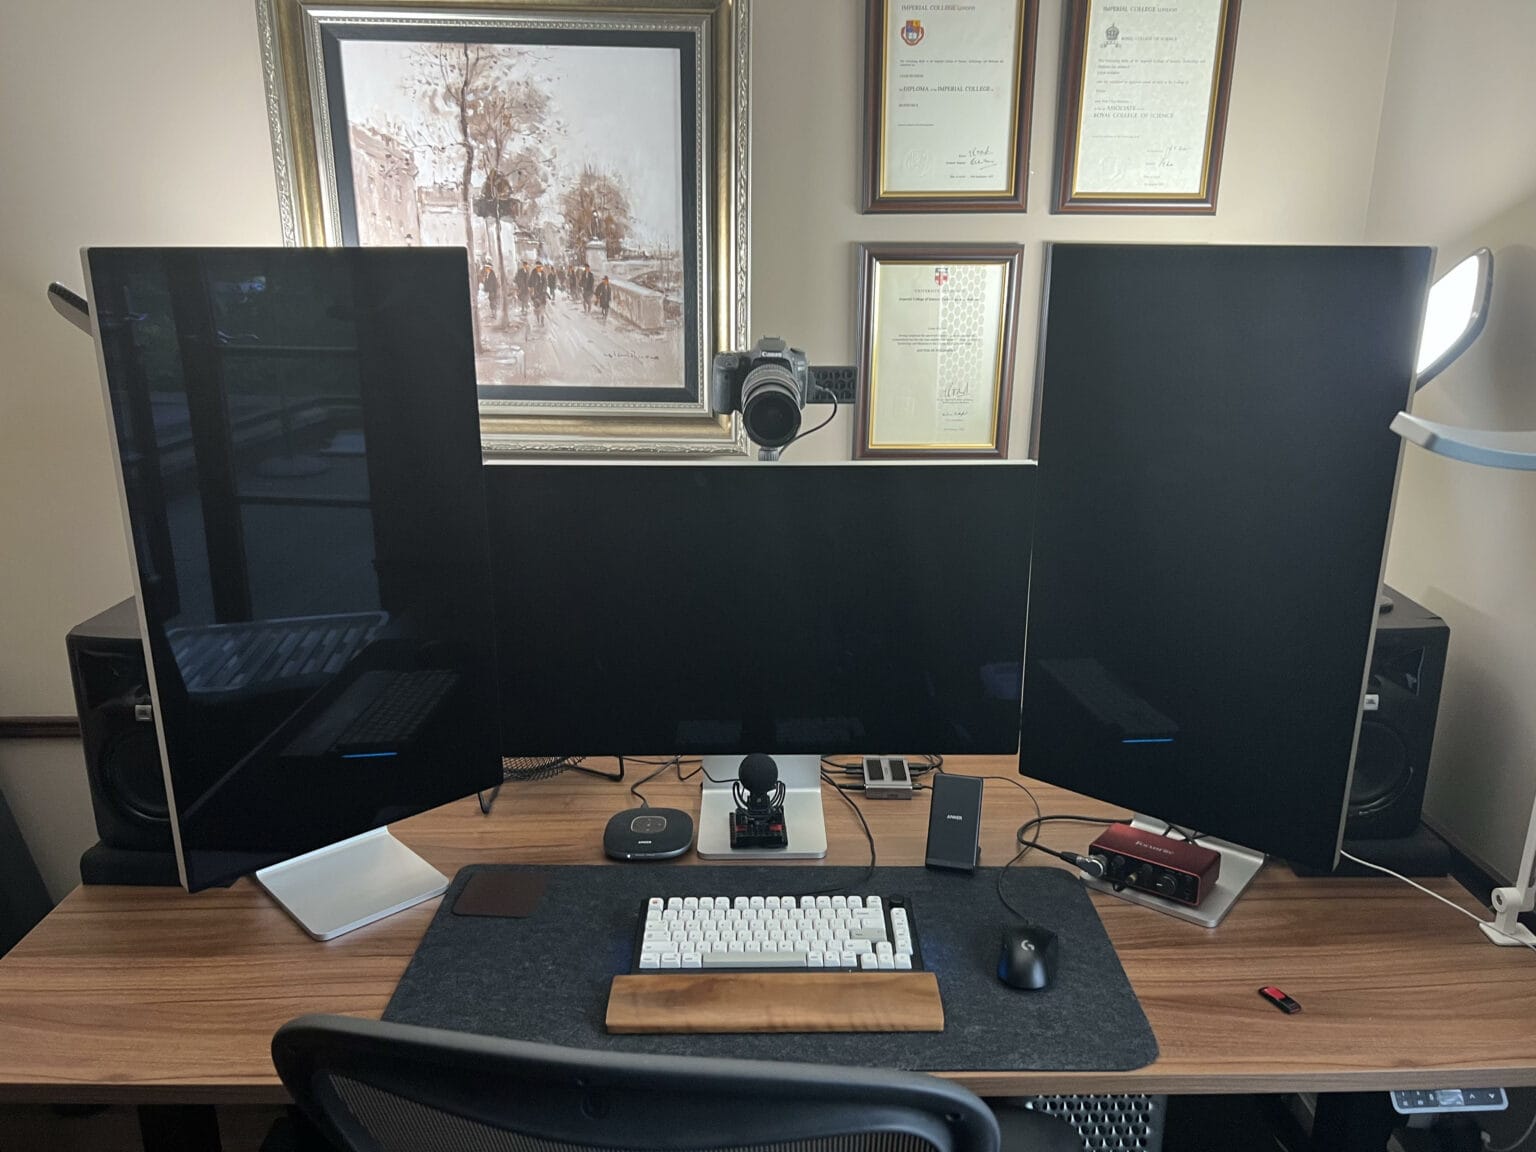 A 2019 Mac Pro is the core of this computer setup, along with a 16-inch M1 Pro MacBook (not pictured).